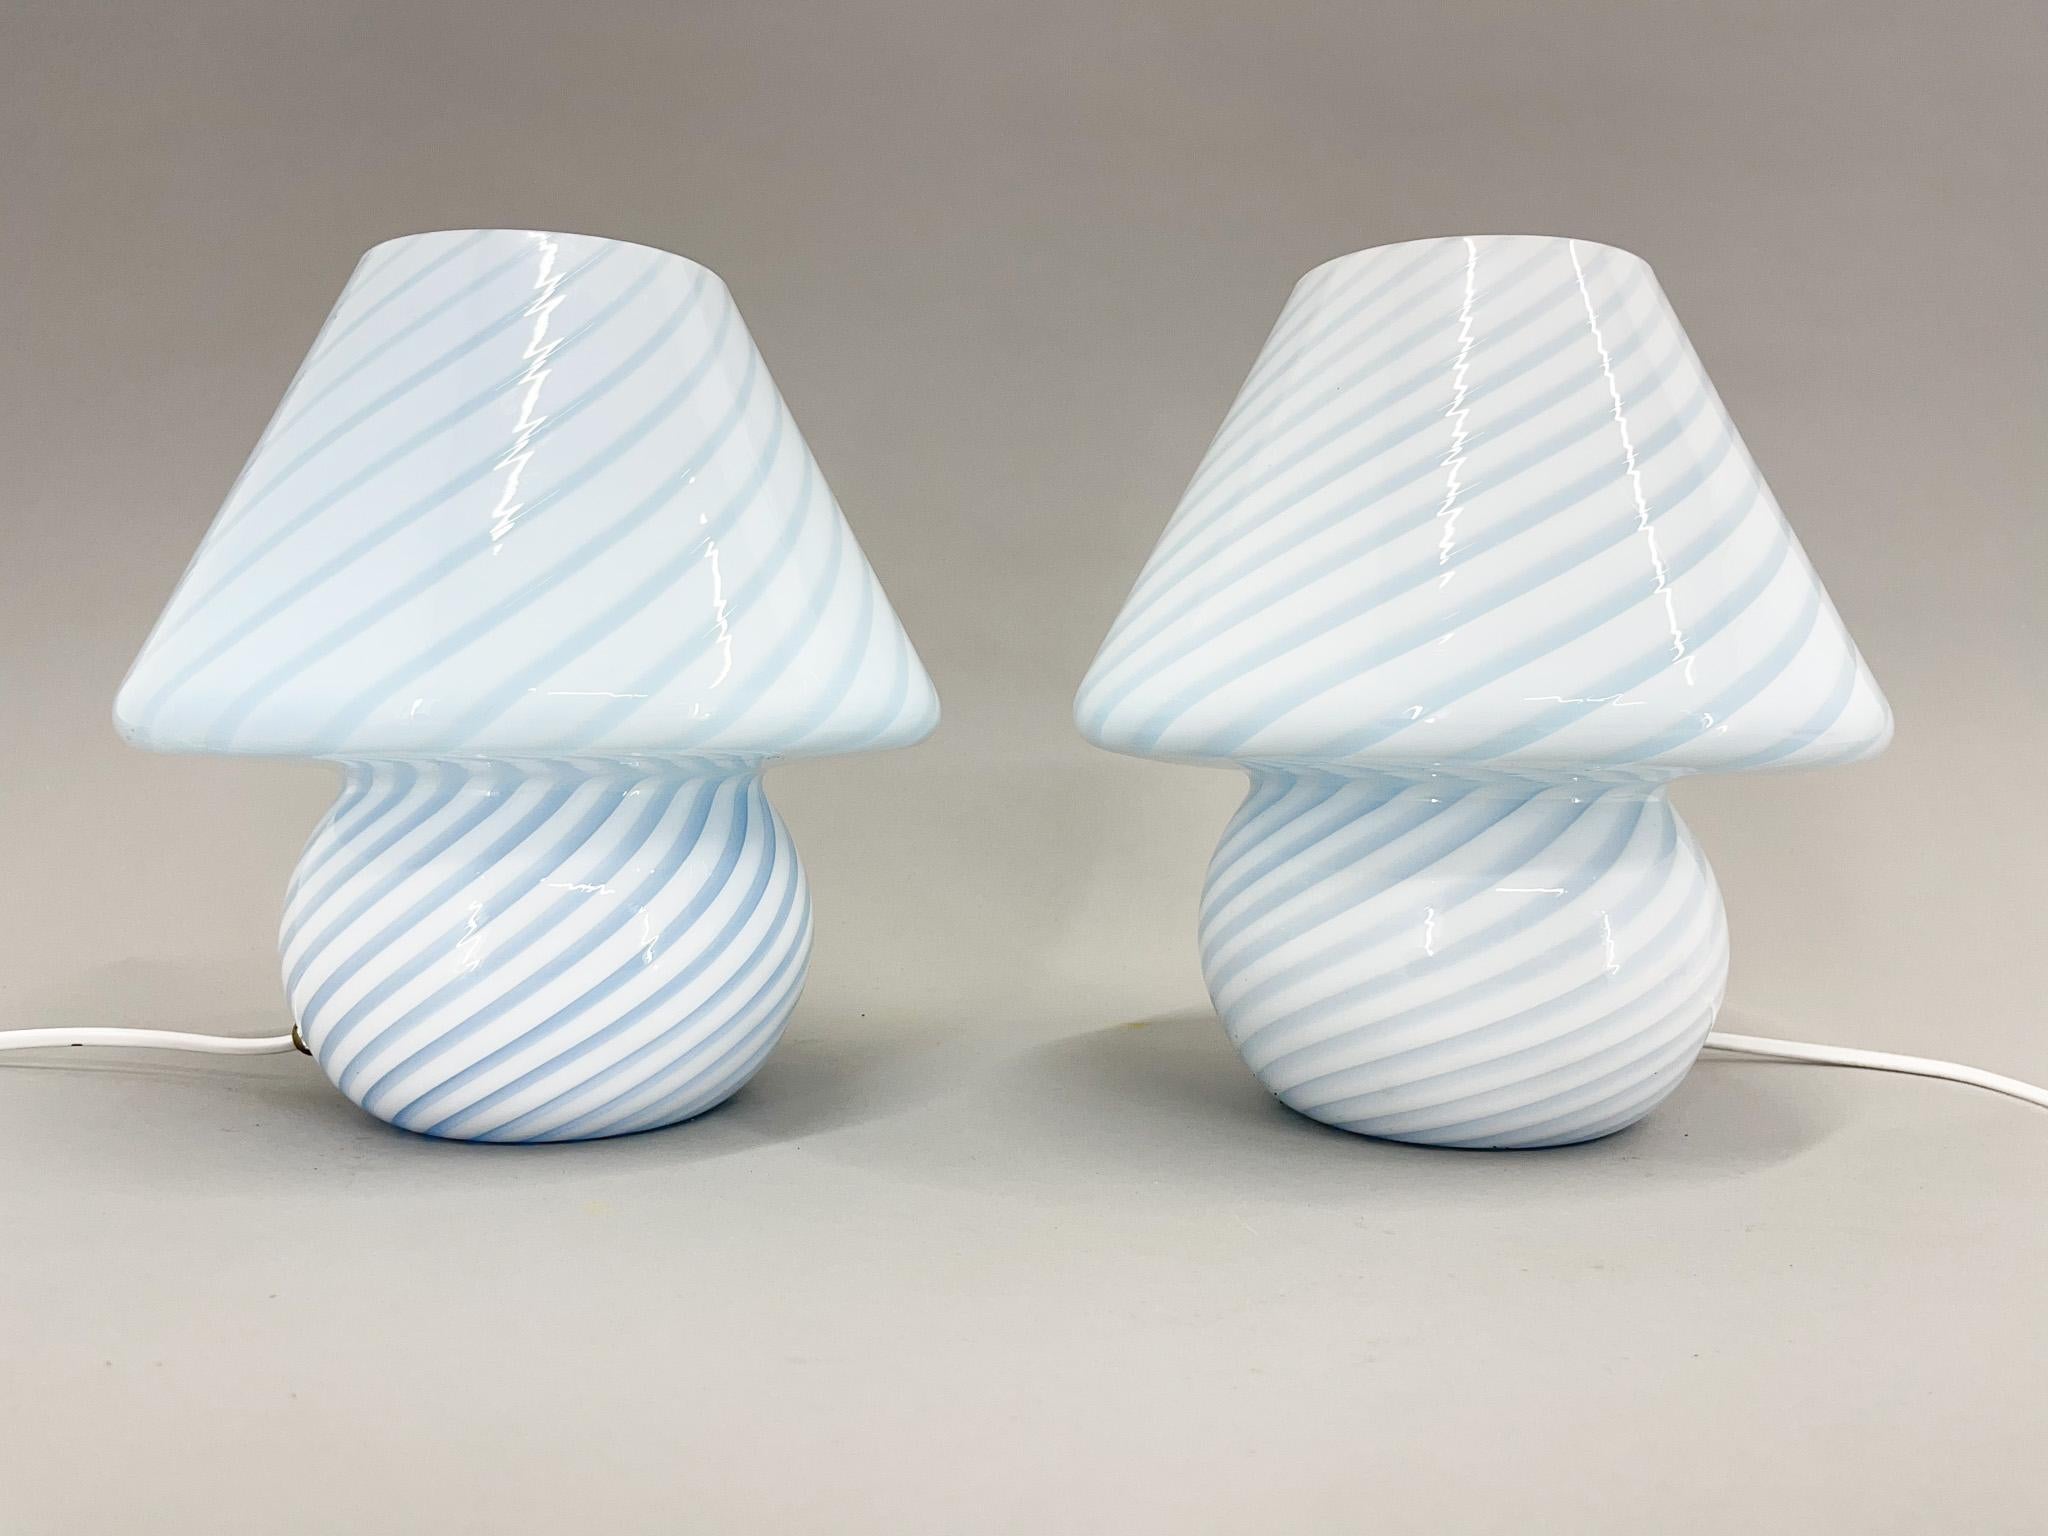 Set of two Murano glass table lamps atributed to Paolo Venini. Produced in Italy in the 1970's. New wiring, bulb: E 14